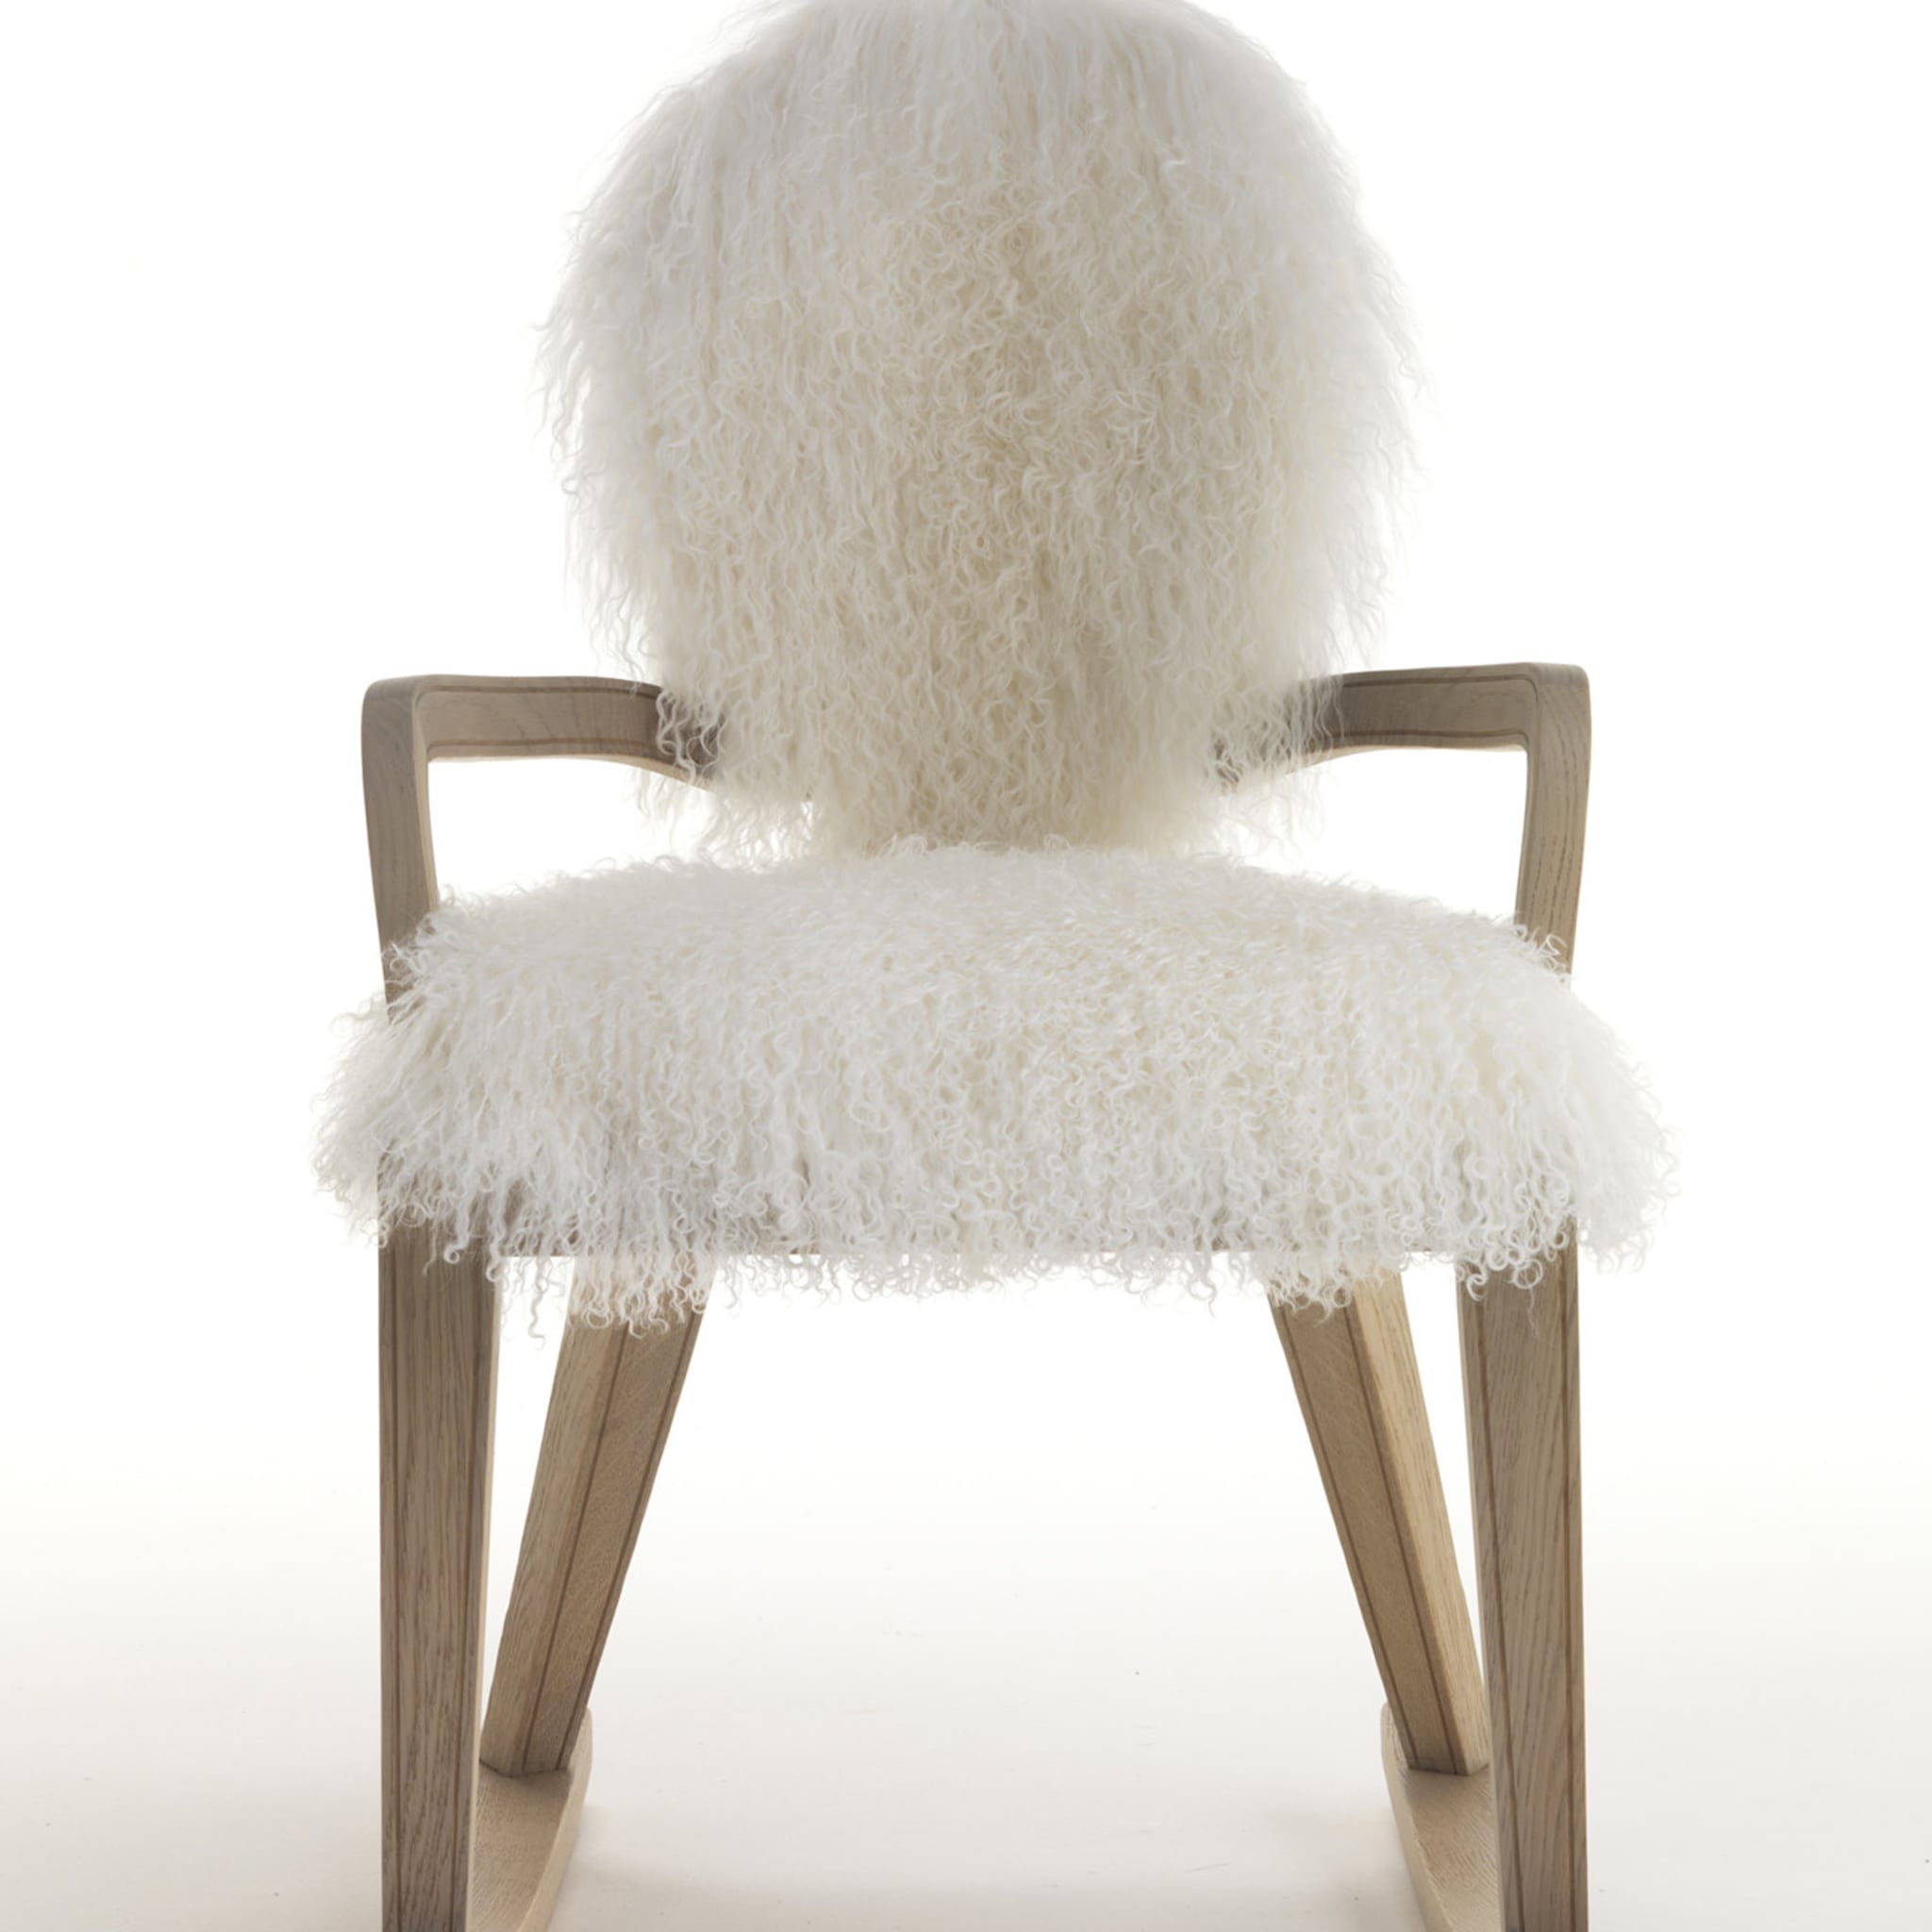 Monarch Rocking Chair by Archer Humphryes Architects - Alternative view 3